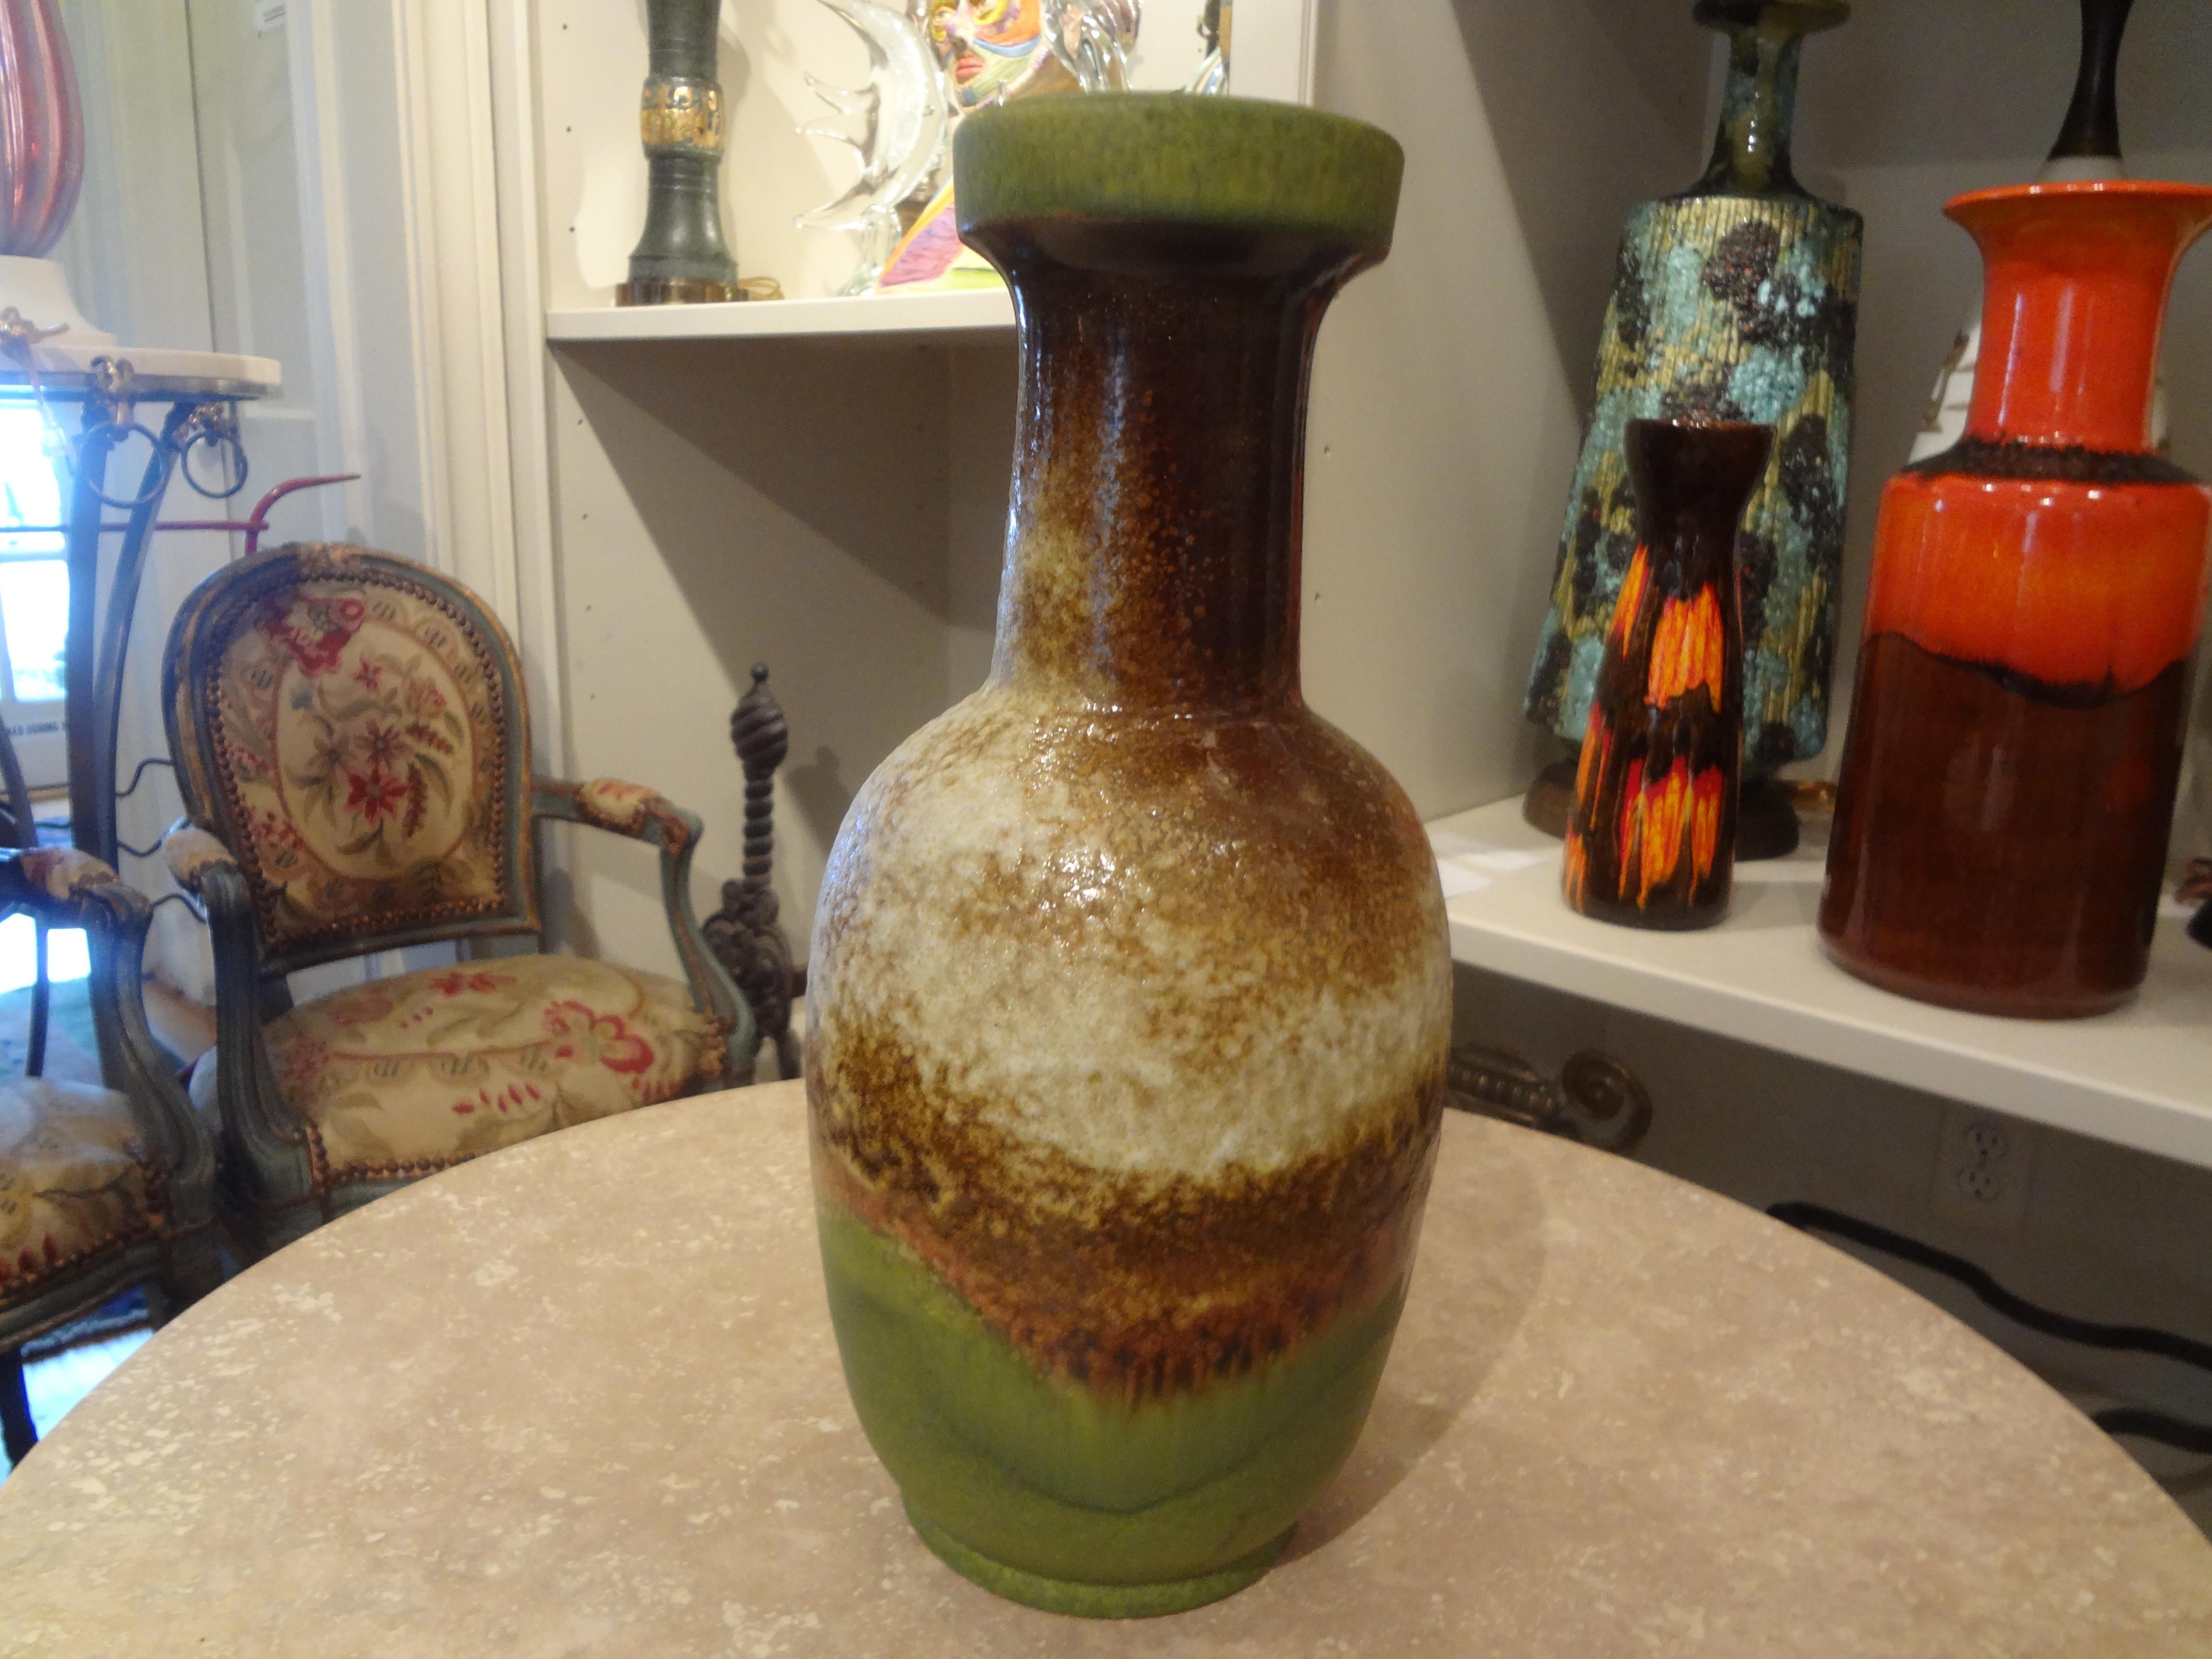 Mid-Century West German pottery vase by Dumler & Breiden. This West German Vase has beautiful colors and glaze. We have a large collection of West German pottery vases listed on 1stdibs. Check them out at Kirby Antiques, Houston.